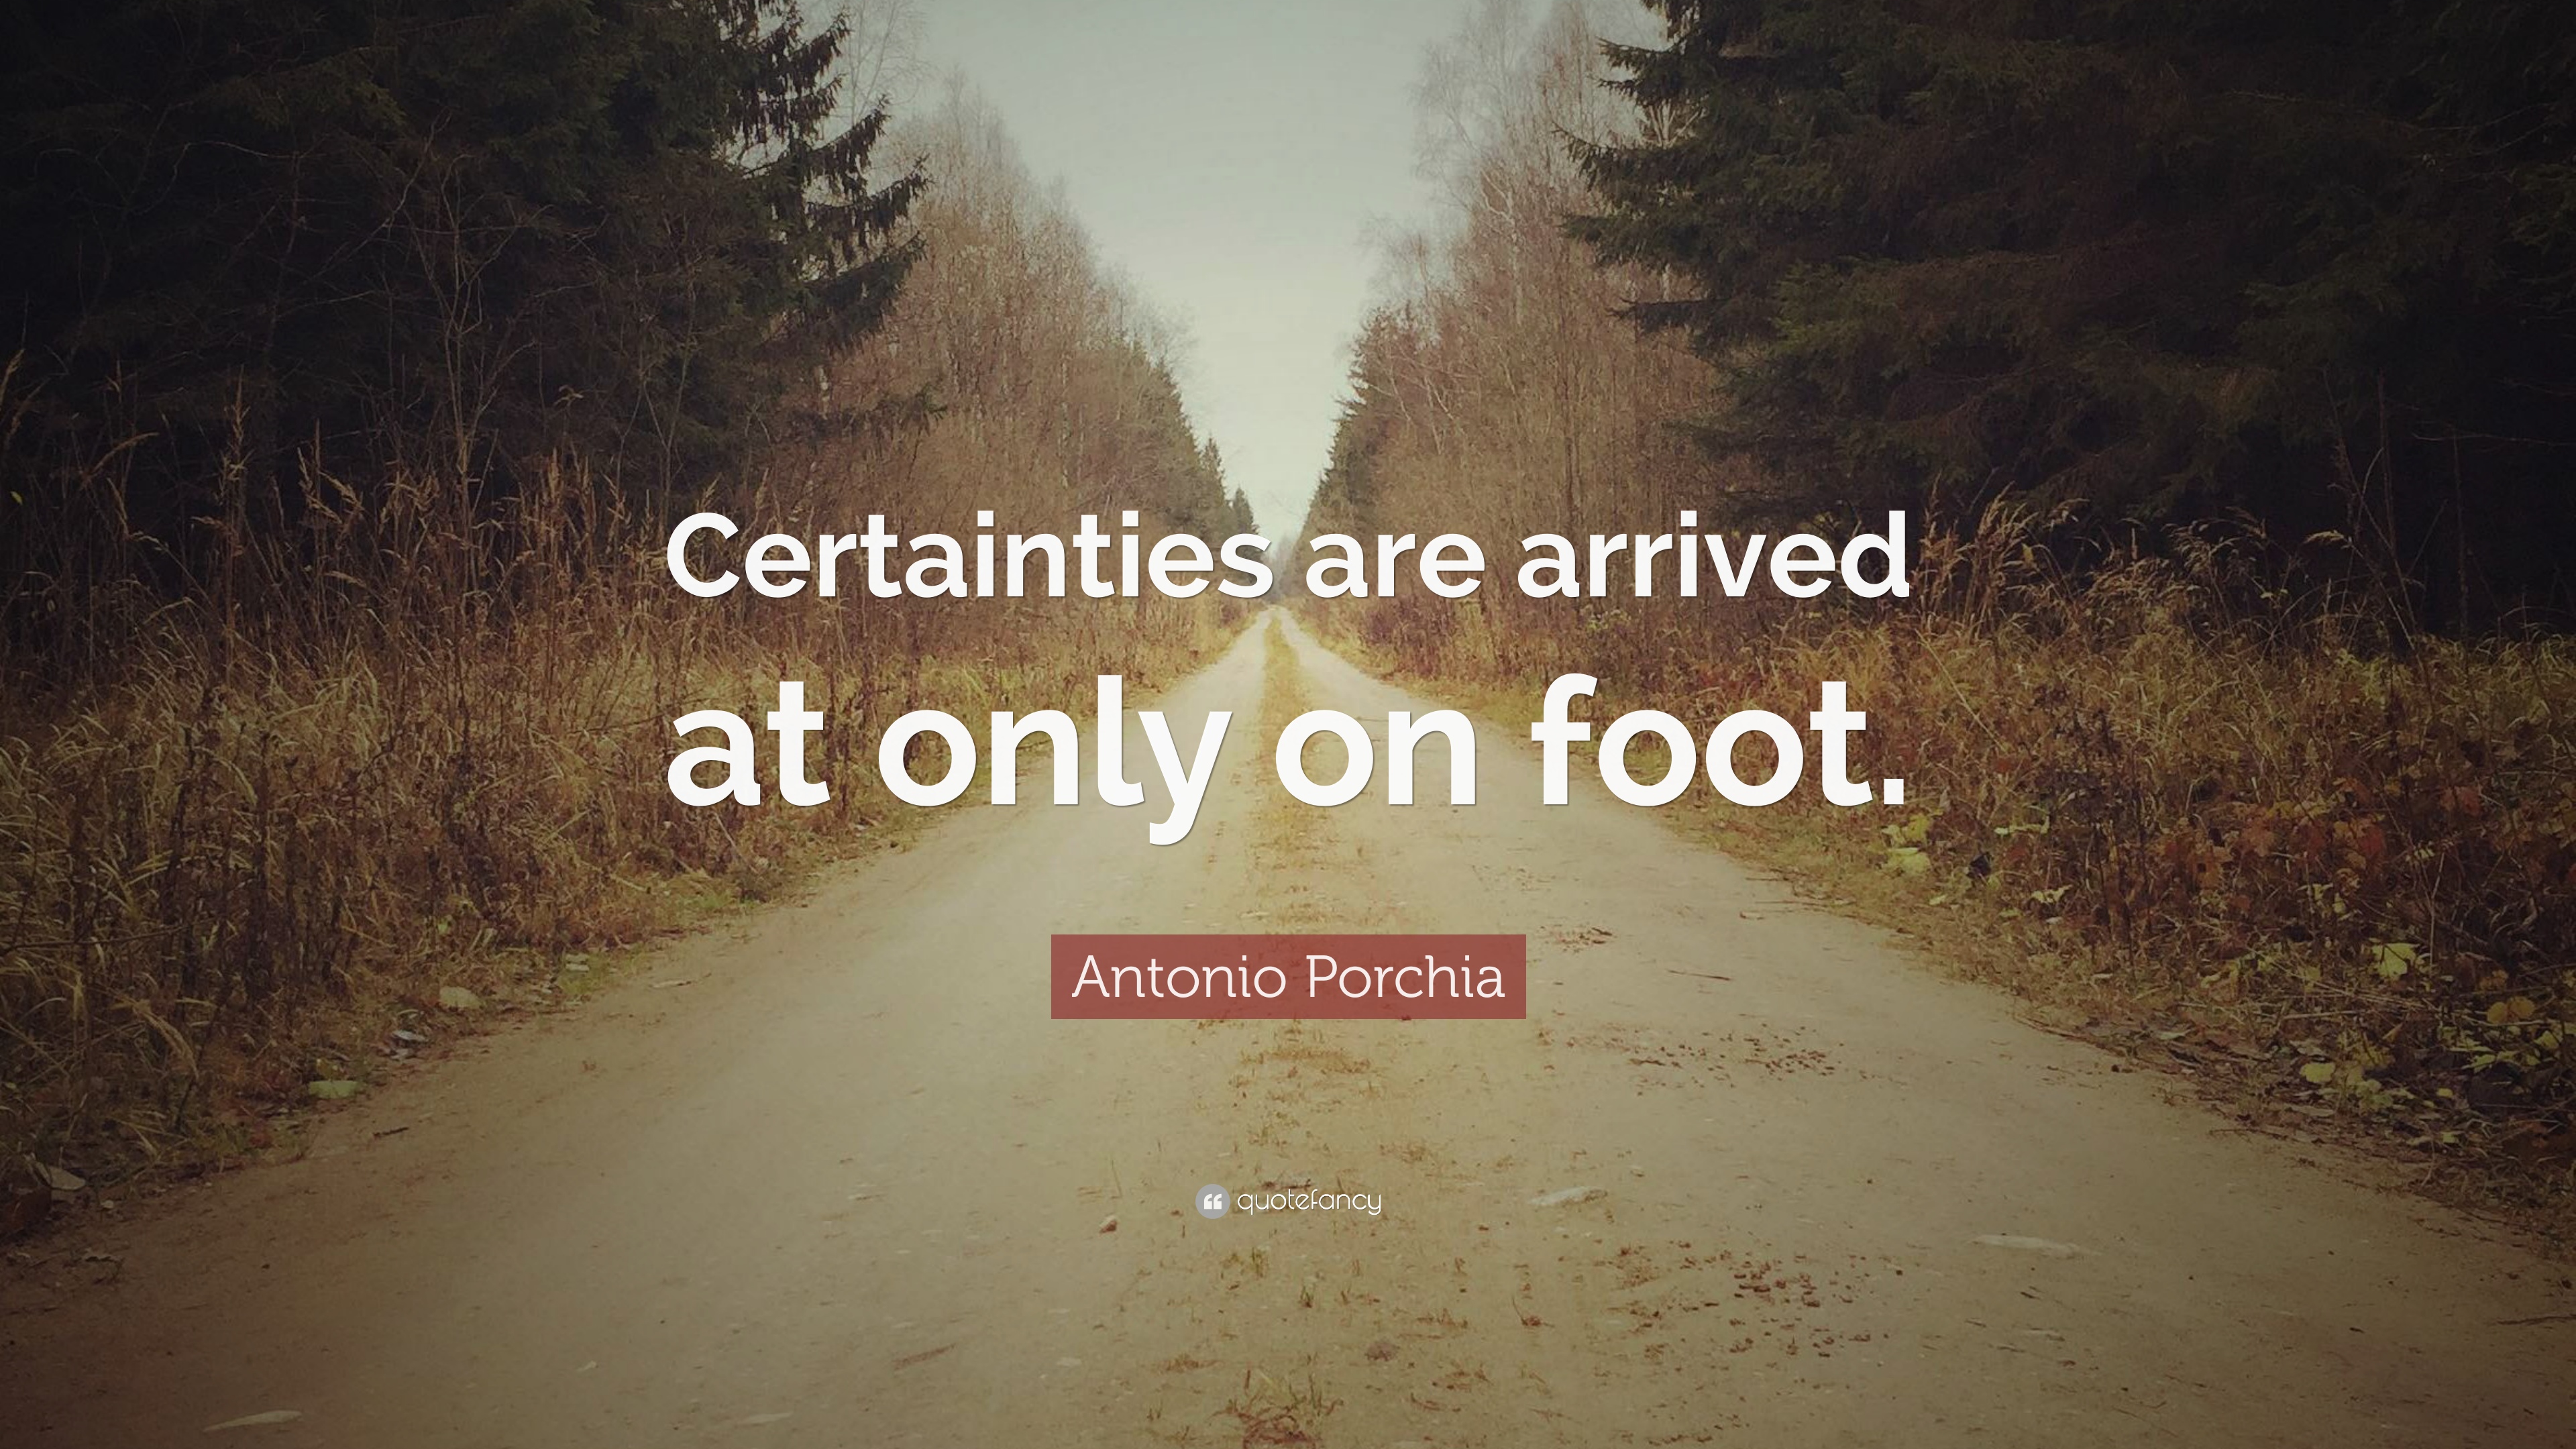 Antonio Porchia Quote: “Certainties are arrived at only on foot.” 7